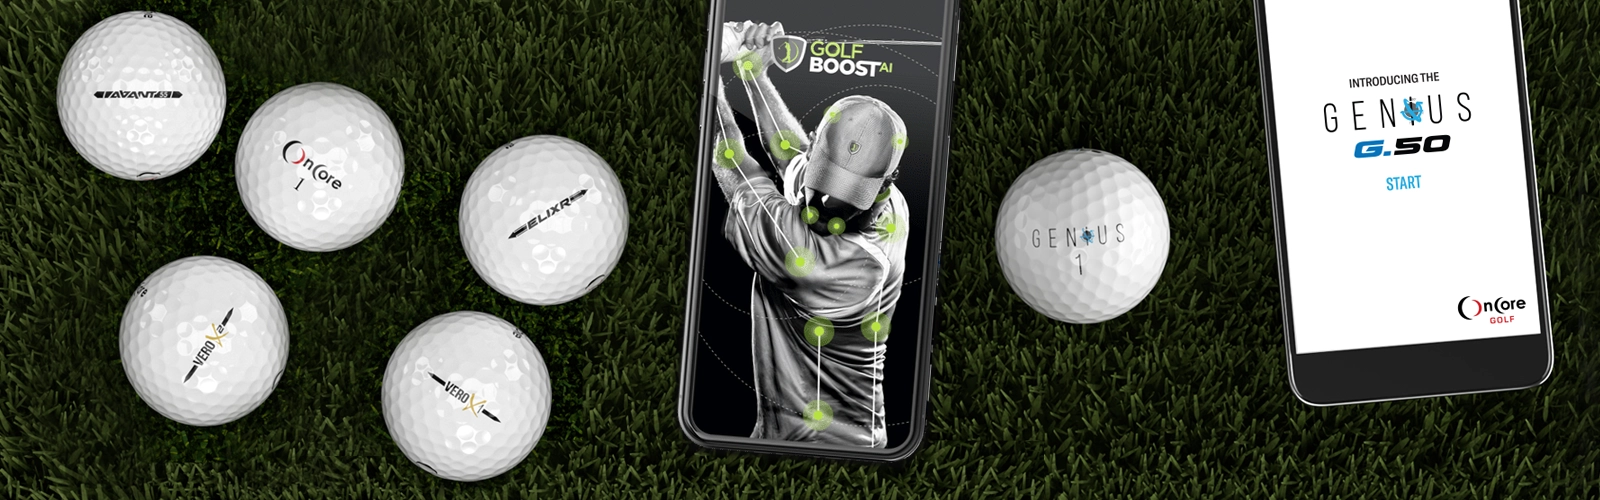 OnCore Golf  - Golf Balls, Golf Apps, GENiUS Bluetooth Ball, with Perimeter Weighting Technology